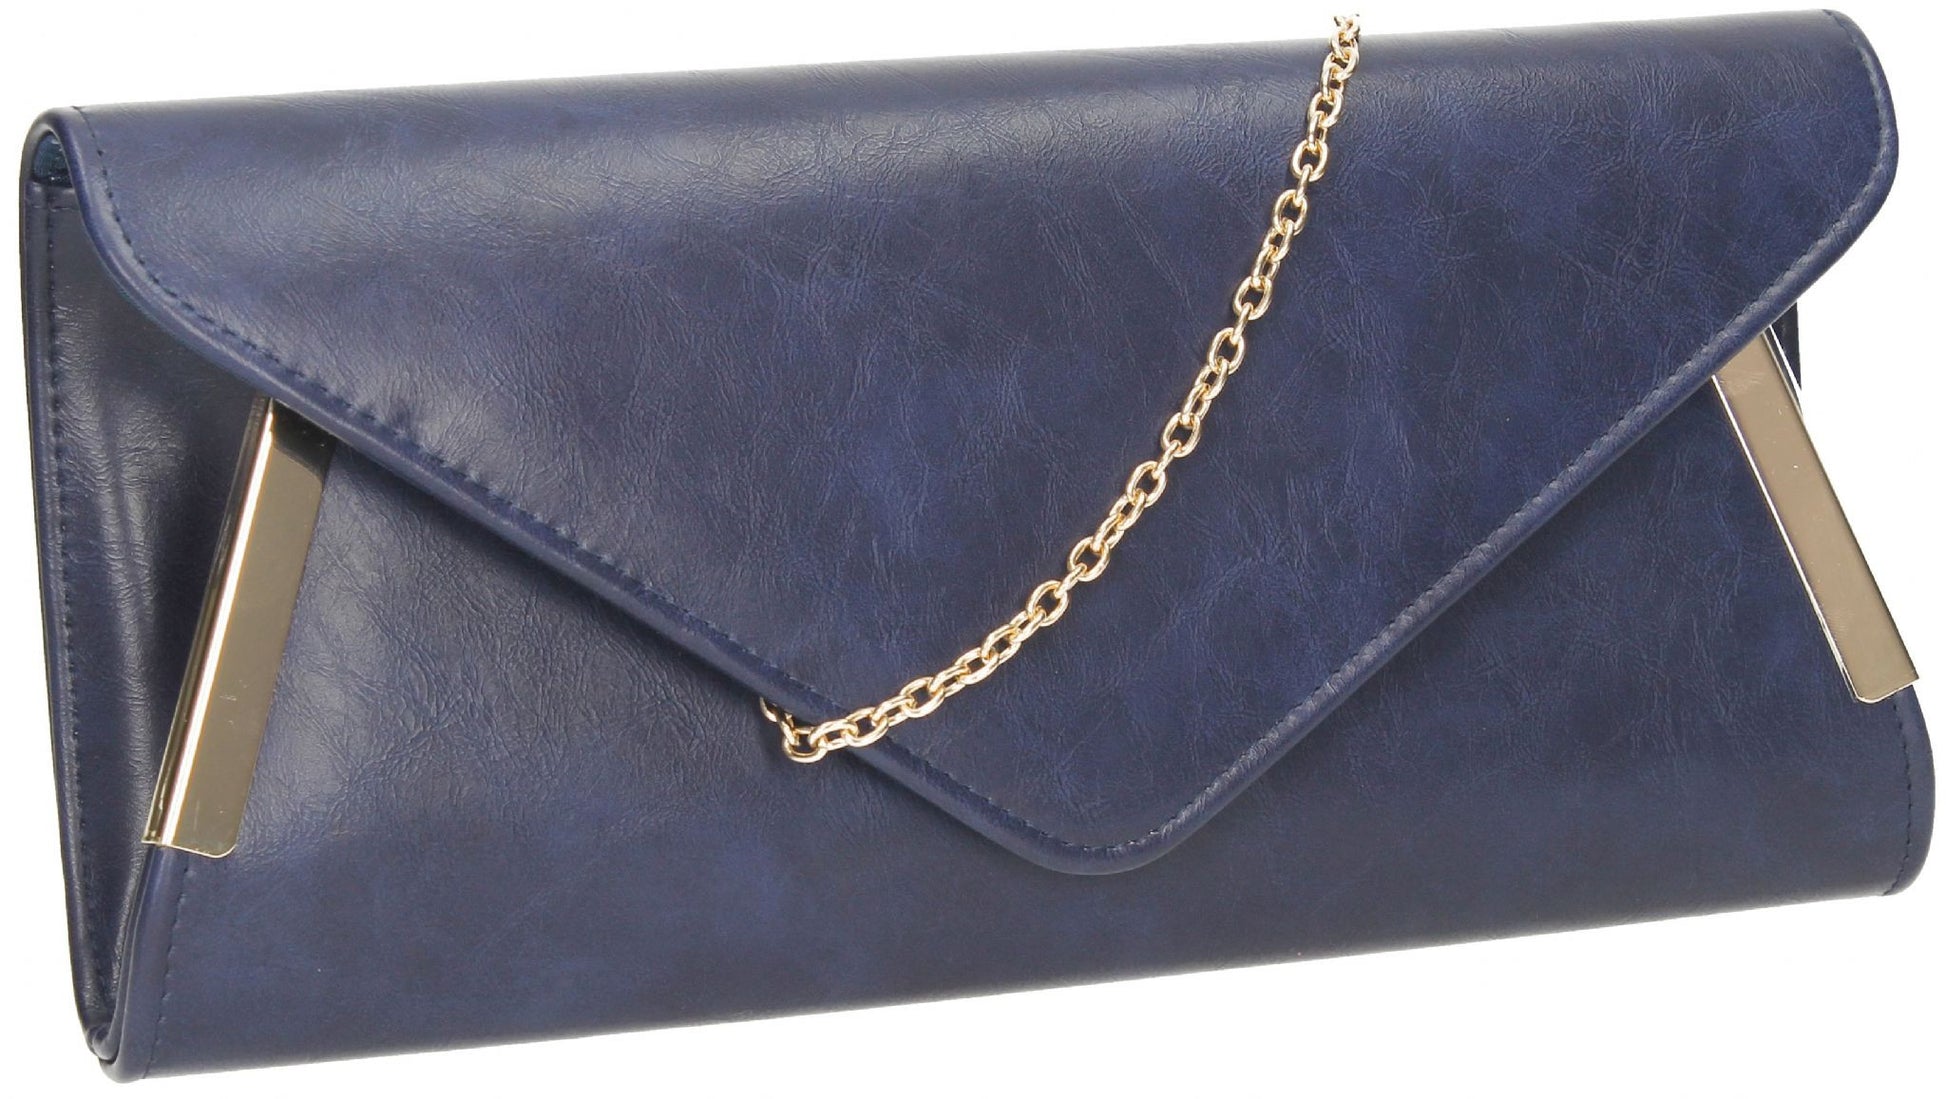 SWANKYSWANS Laurie Clutch Bag Navy Cute Cheap Clutch Bag For Weddings School and Work